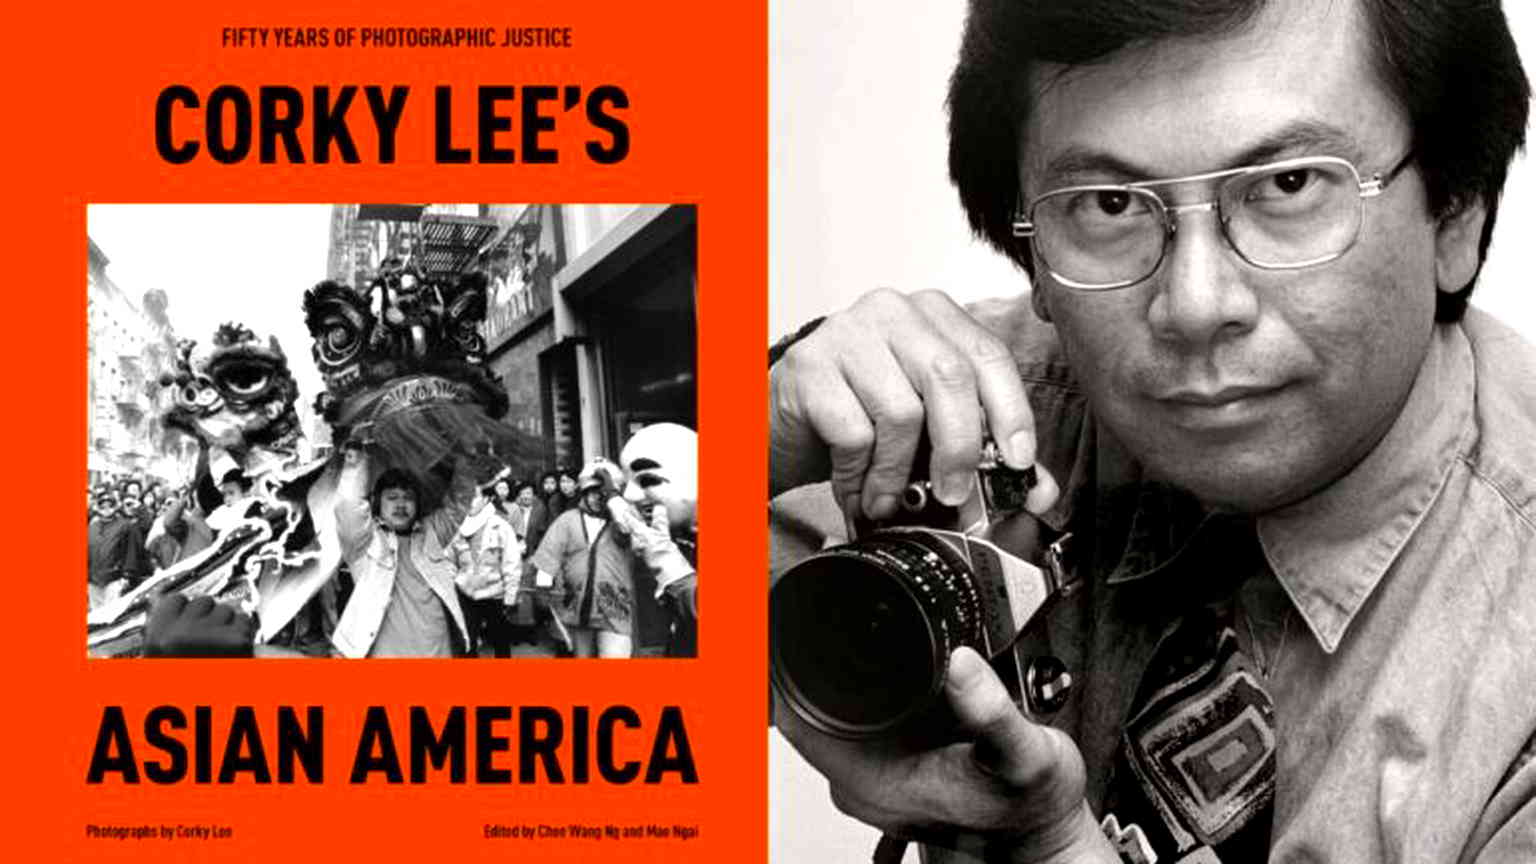 Corky Lee’s 50 years of ‘photographic justice’ chronicled in new book